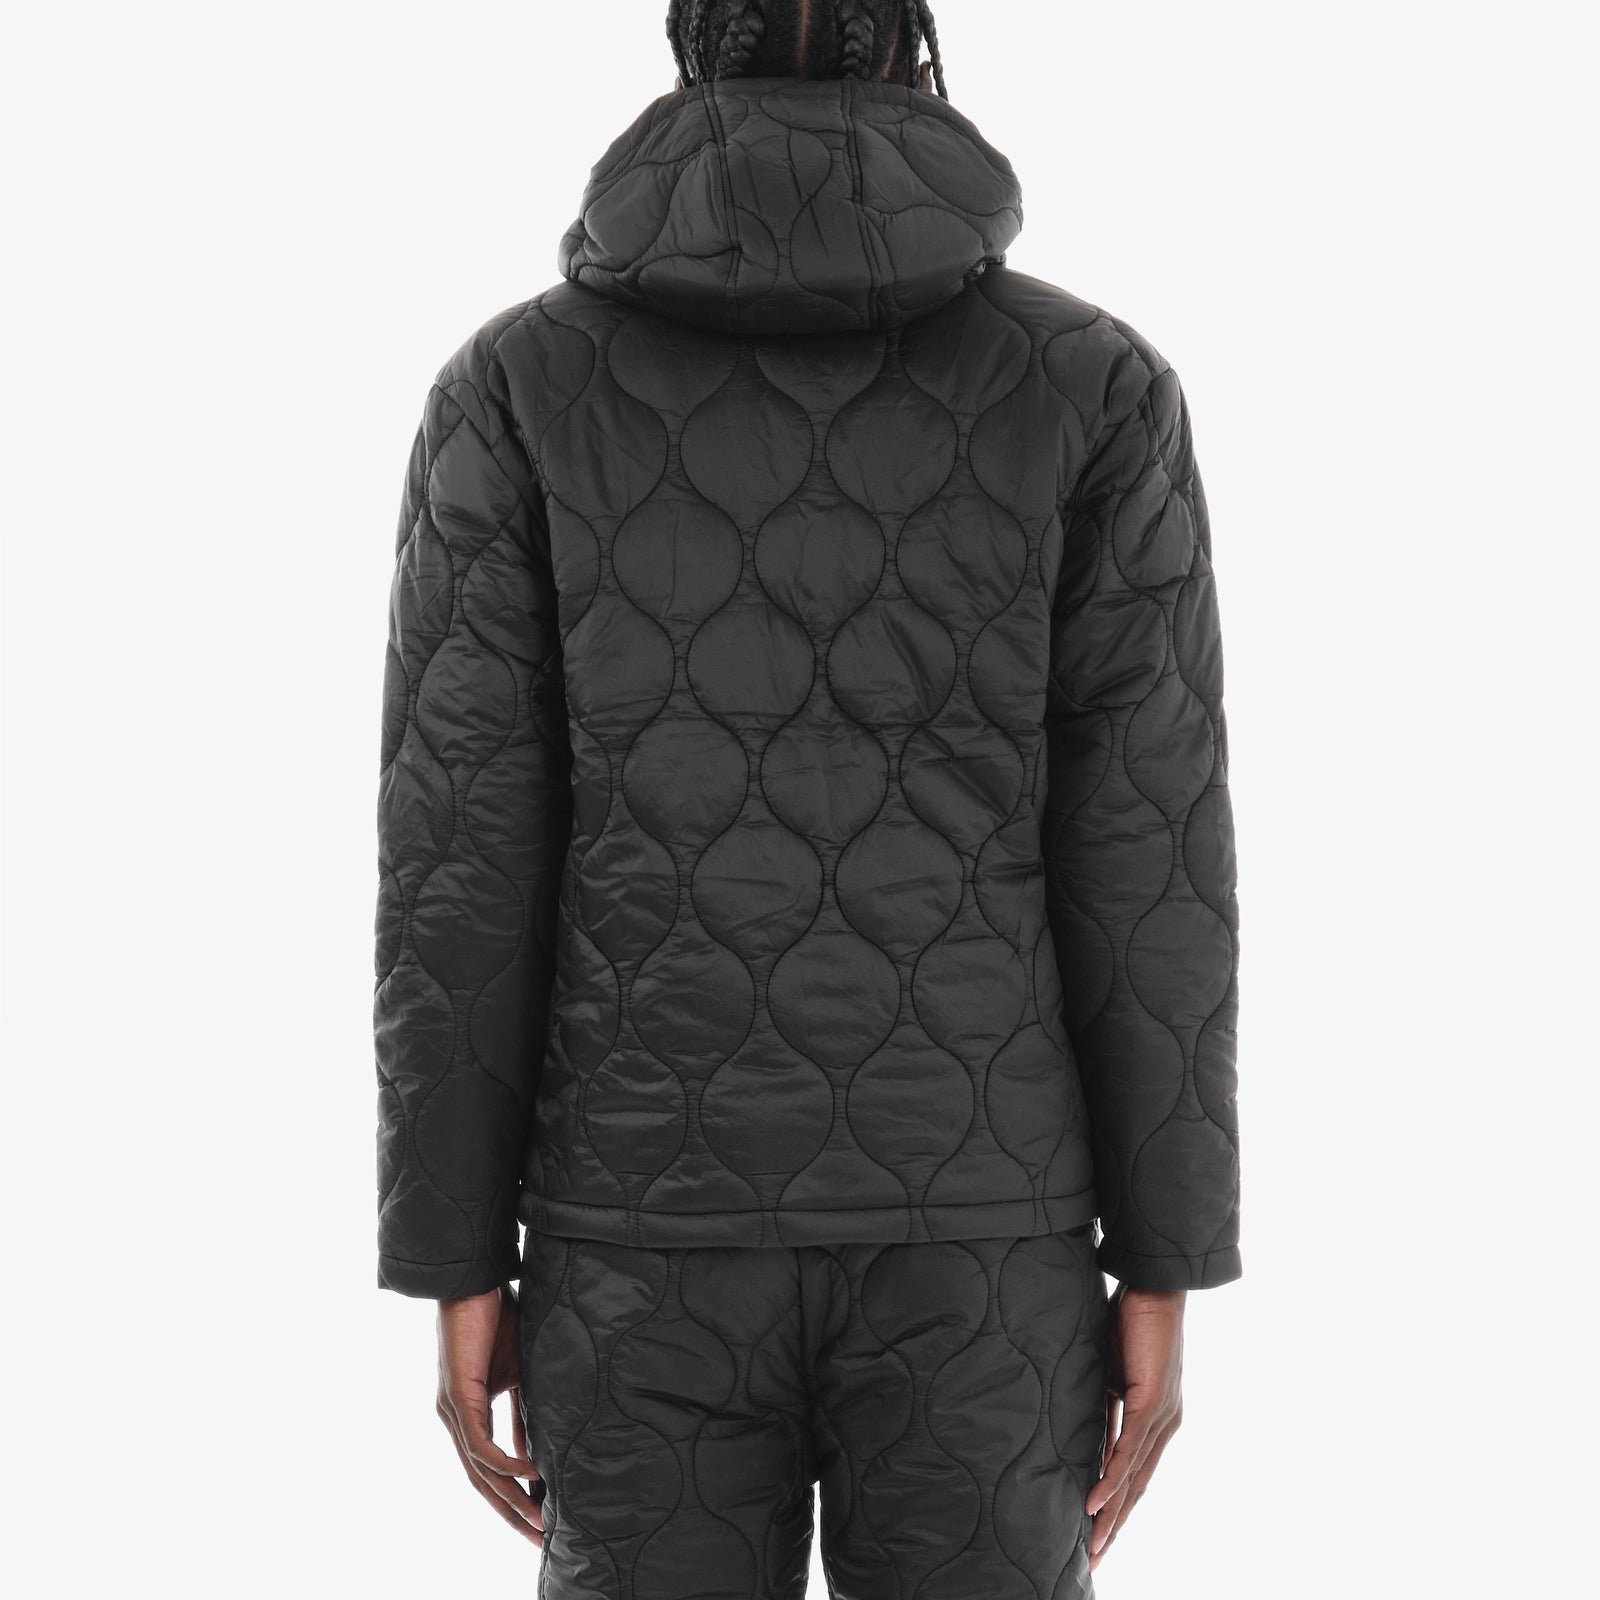 LIFE CODE BLACK QUILTED JACKET